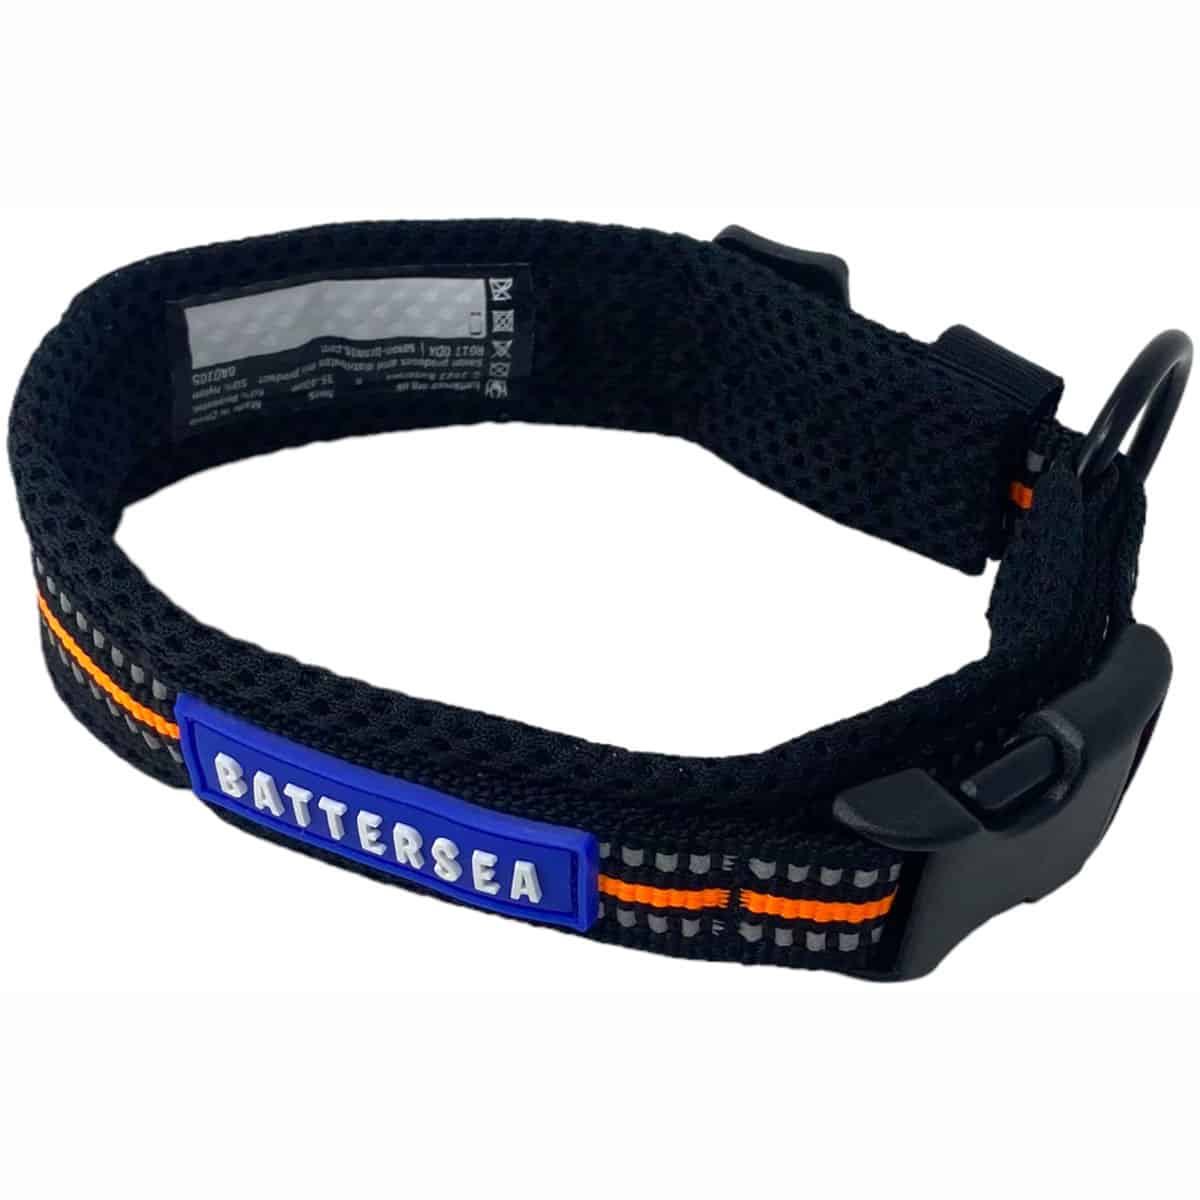 The Battersea Reflective Dog Collar: Let your furry friend shine with the eye-catching Battersea Reflective Dog Collar - 45 deg top views